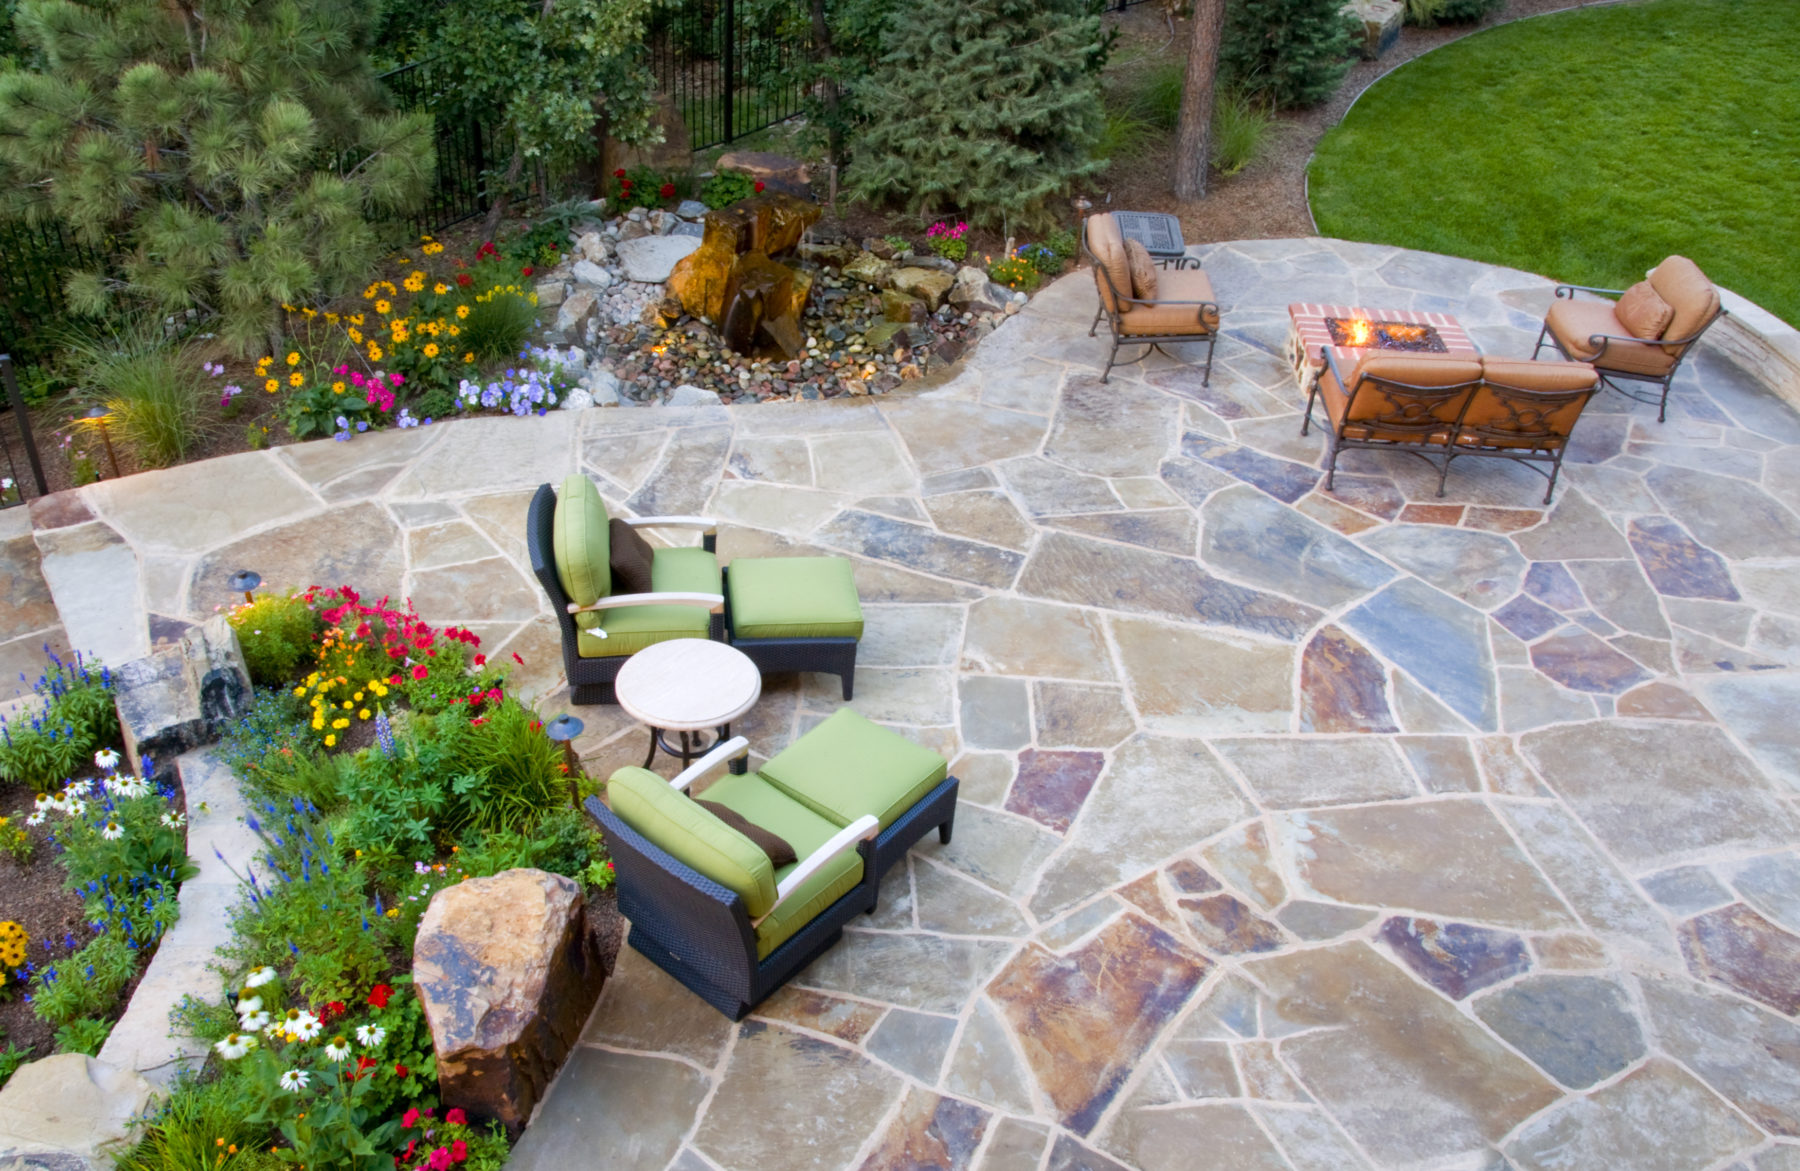 Stone structures & other hardscapes.